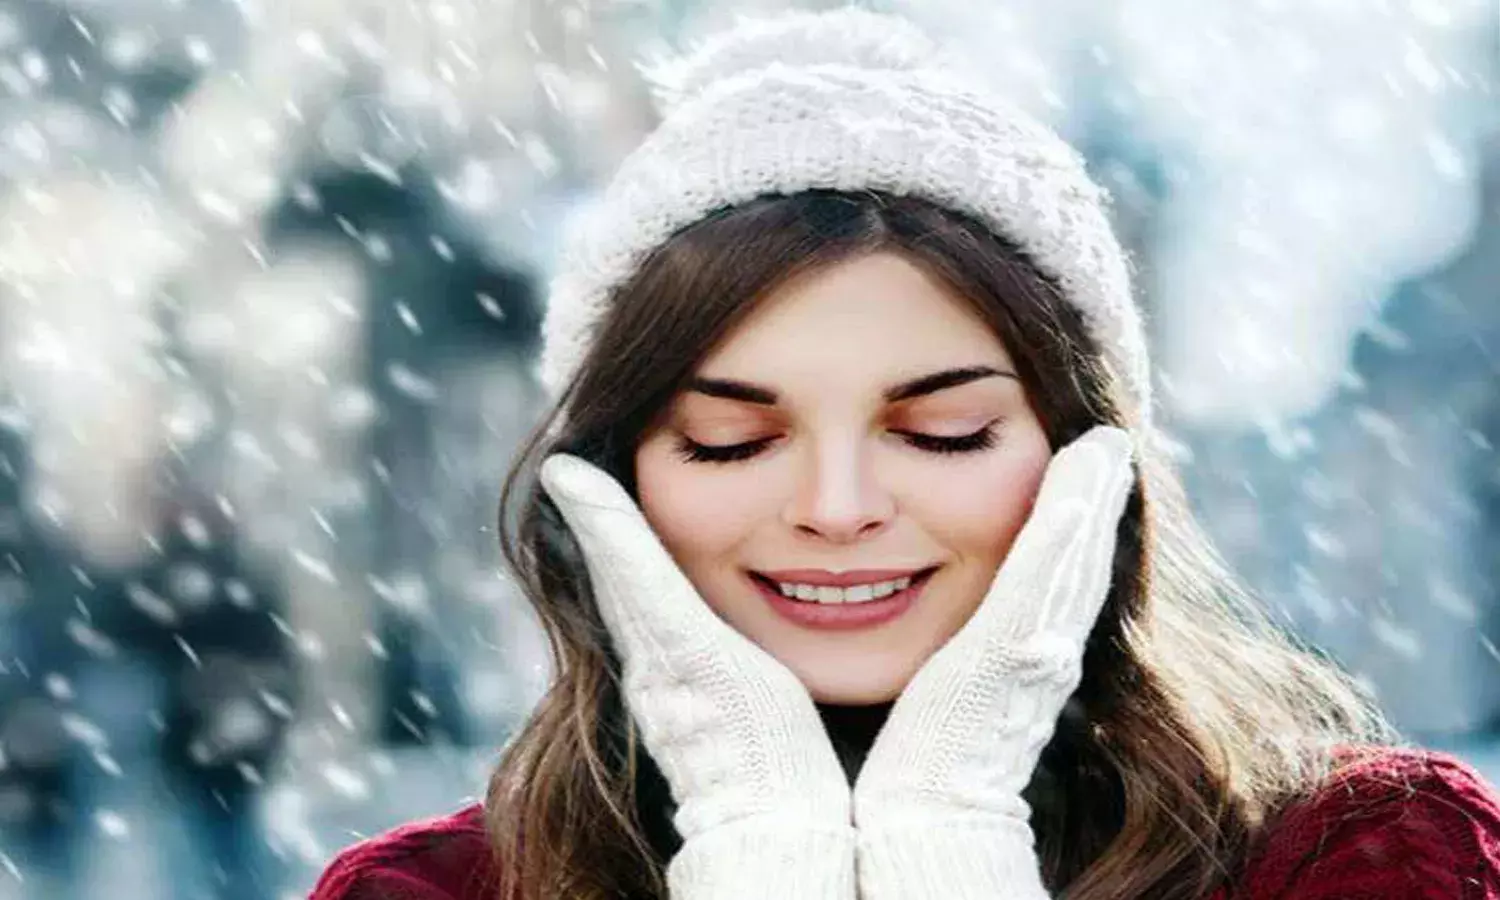 Skincare in Winters: Here are few quick tips for a soft & glowy skin